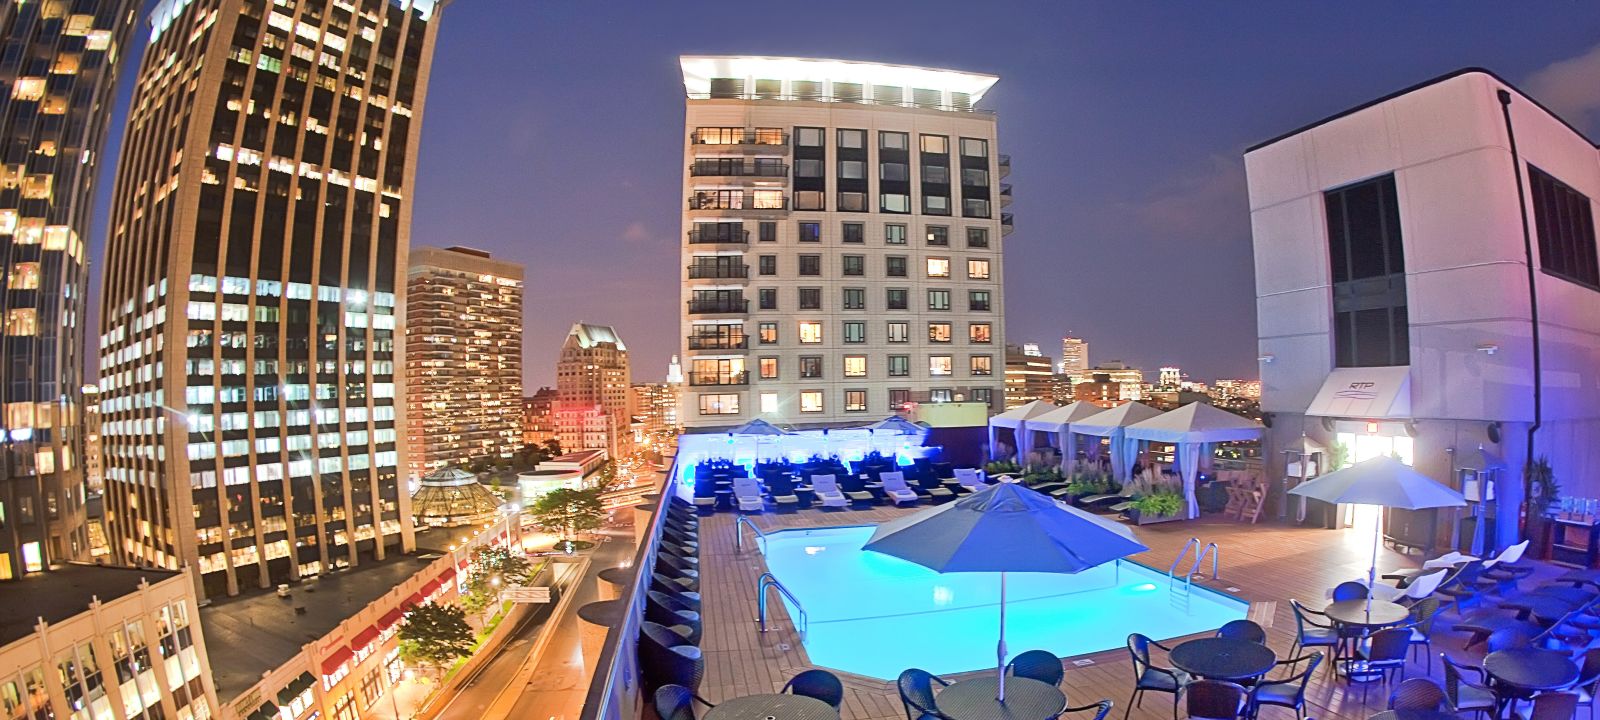 The Colonnade Hotel Rooftop Pool